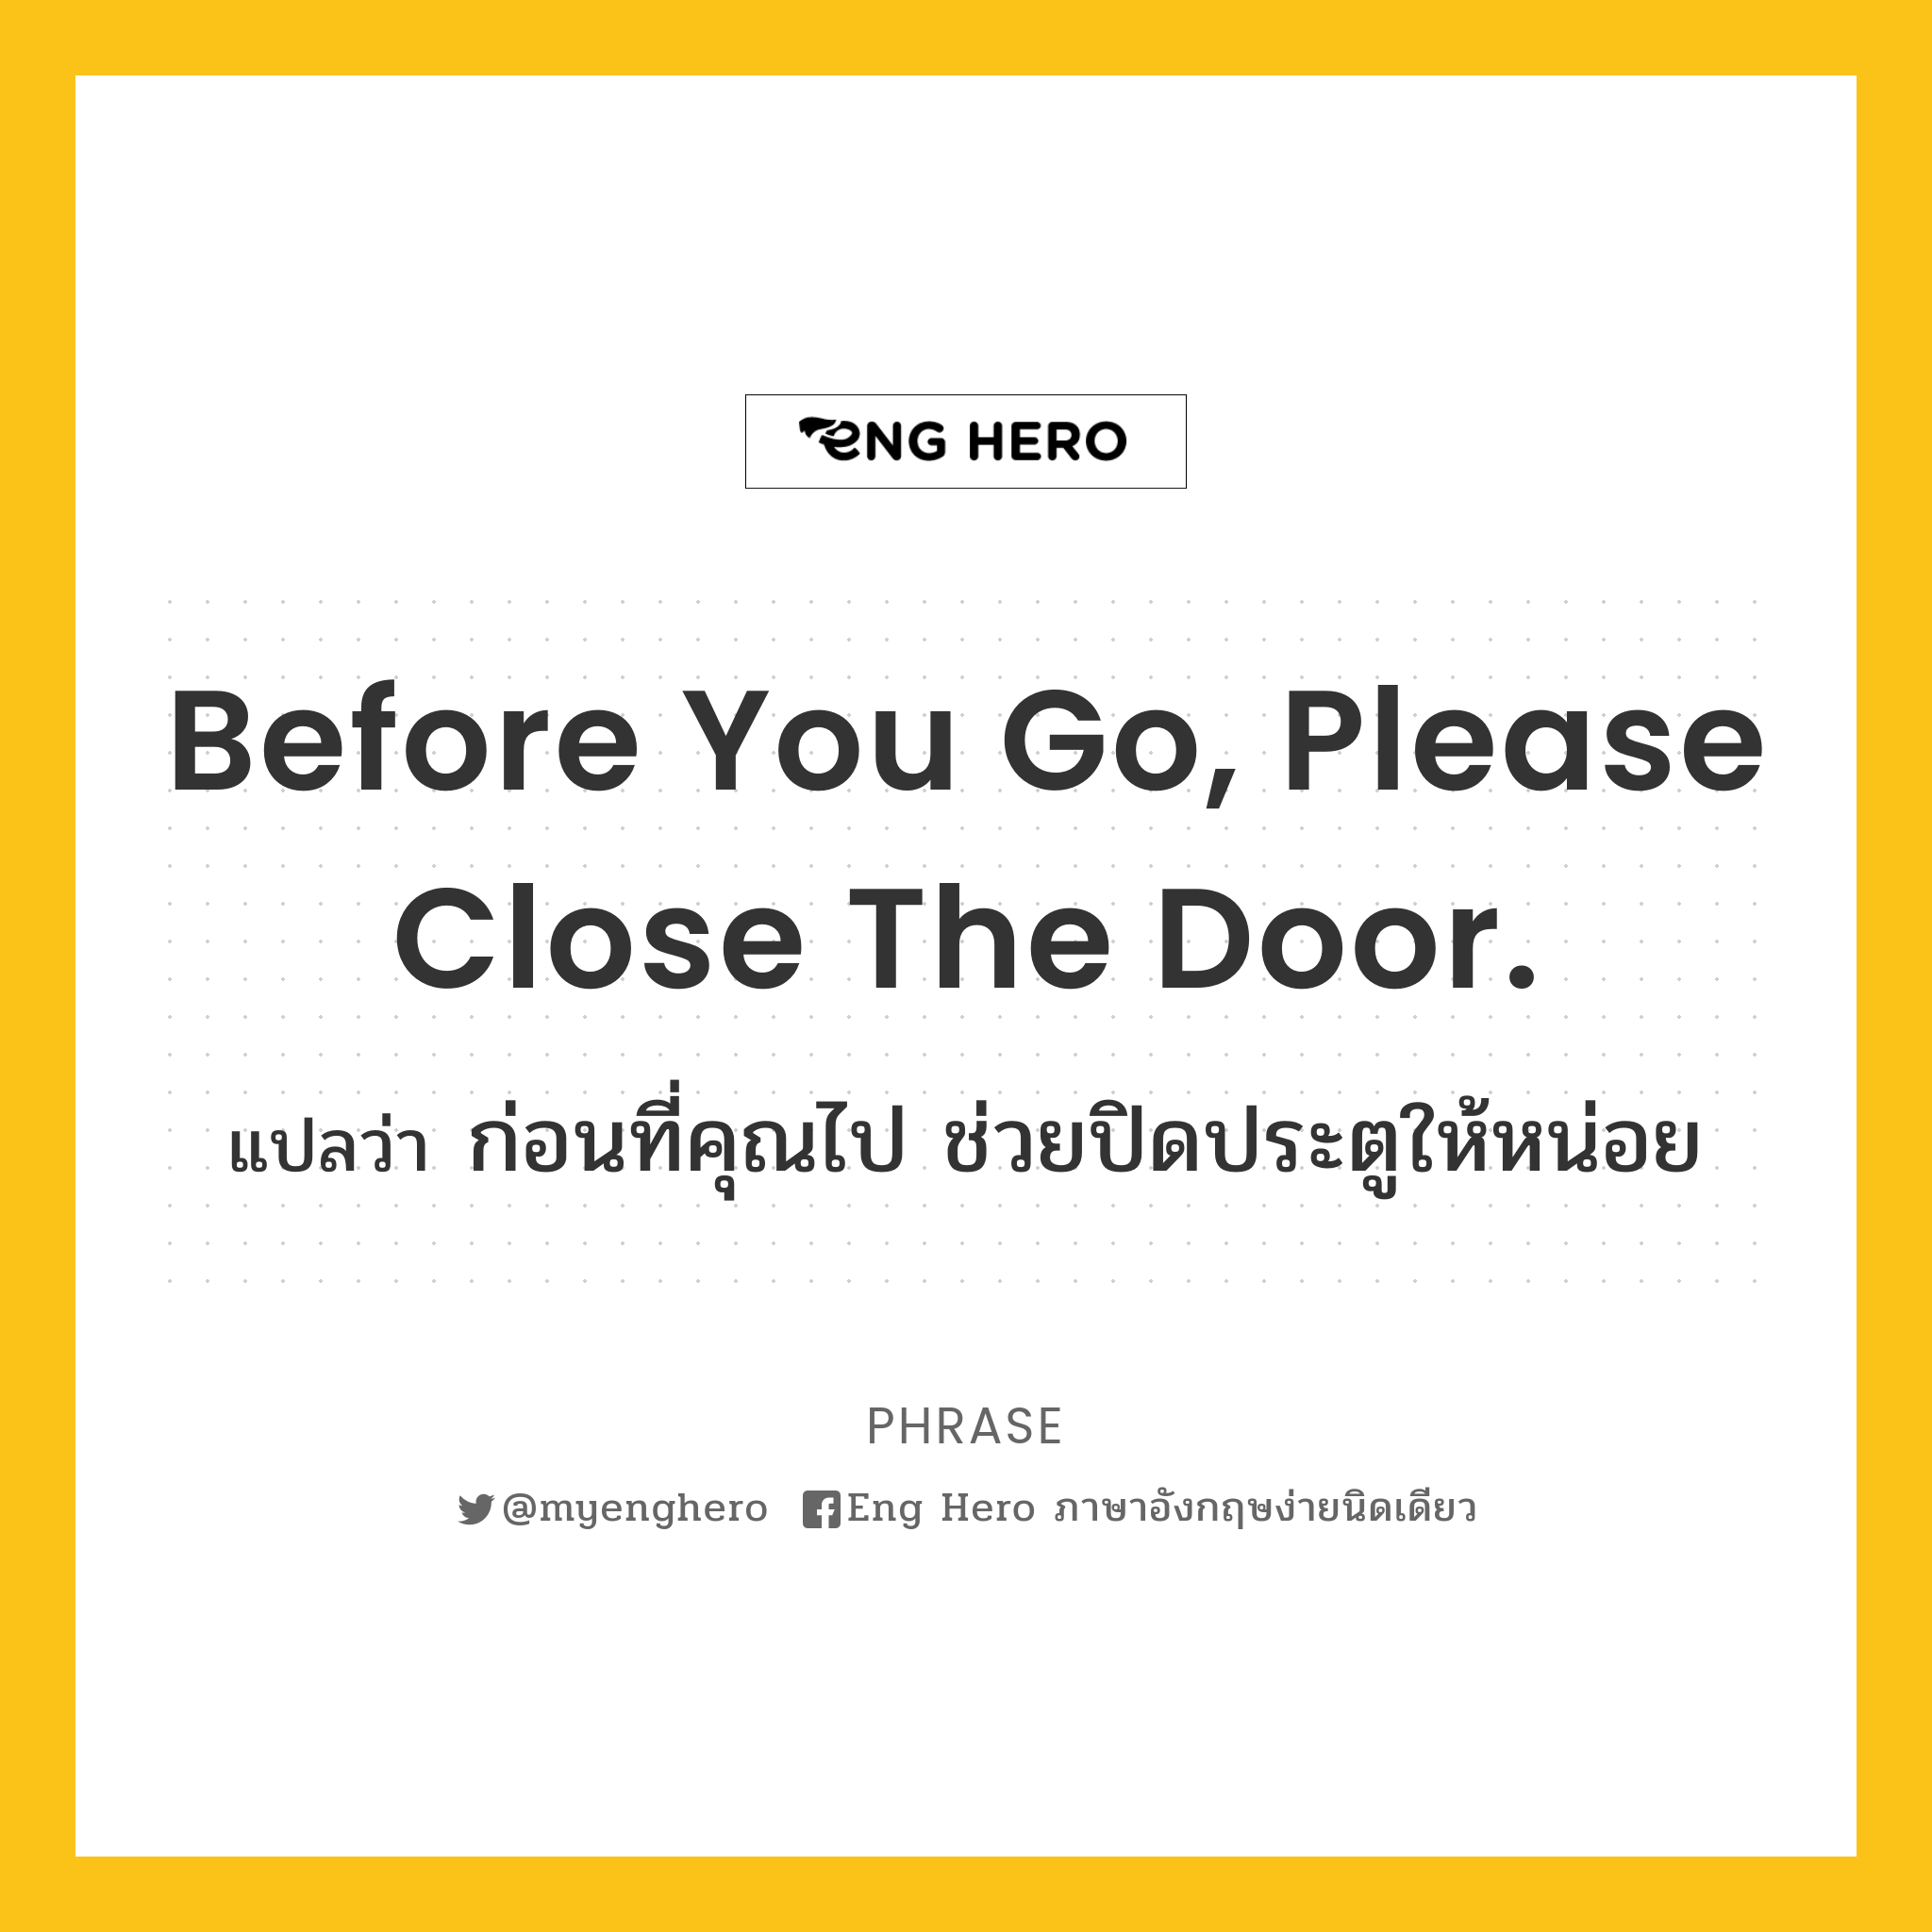 Before you go, please close the door.